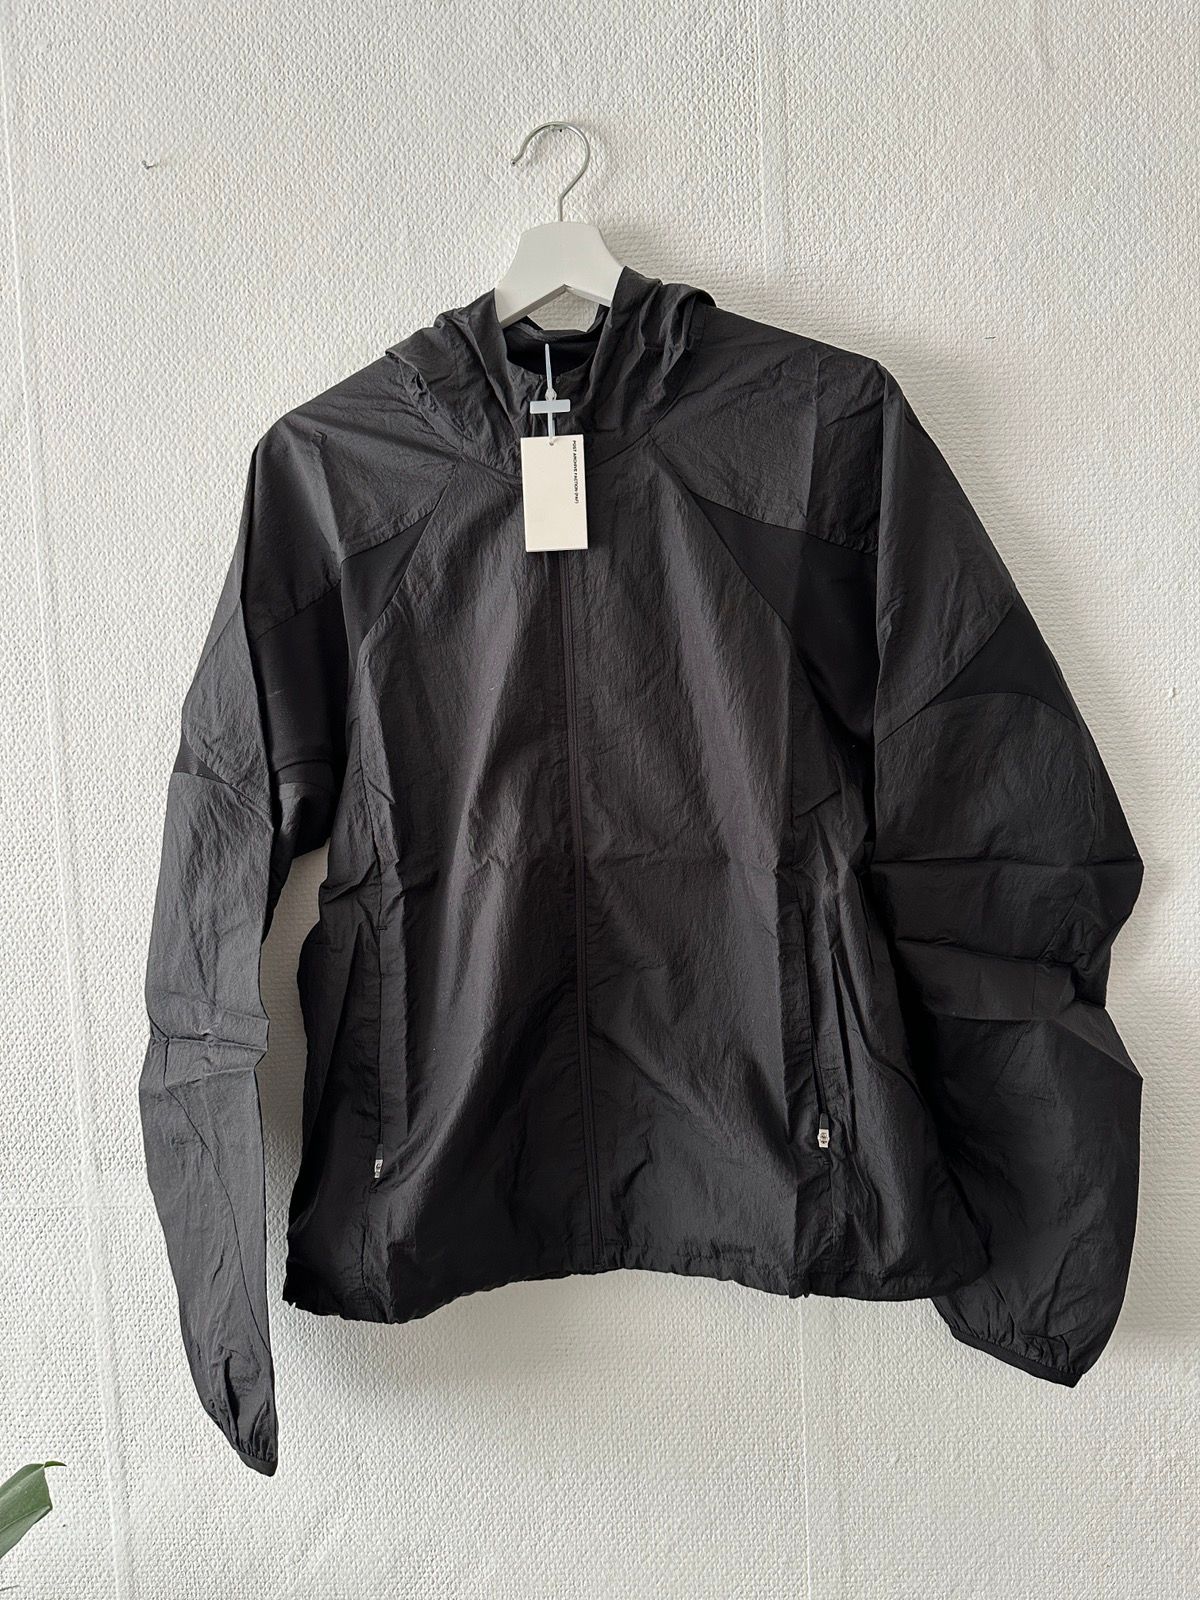 POST ARCHIVE FACTION (PAF) 5.0+ TECHNICAL JACKET RIGHT (BLACK) | Grailed